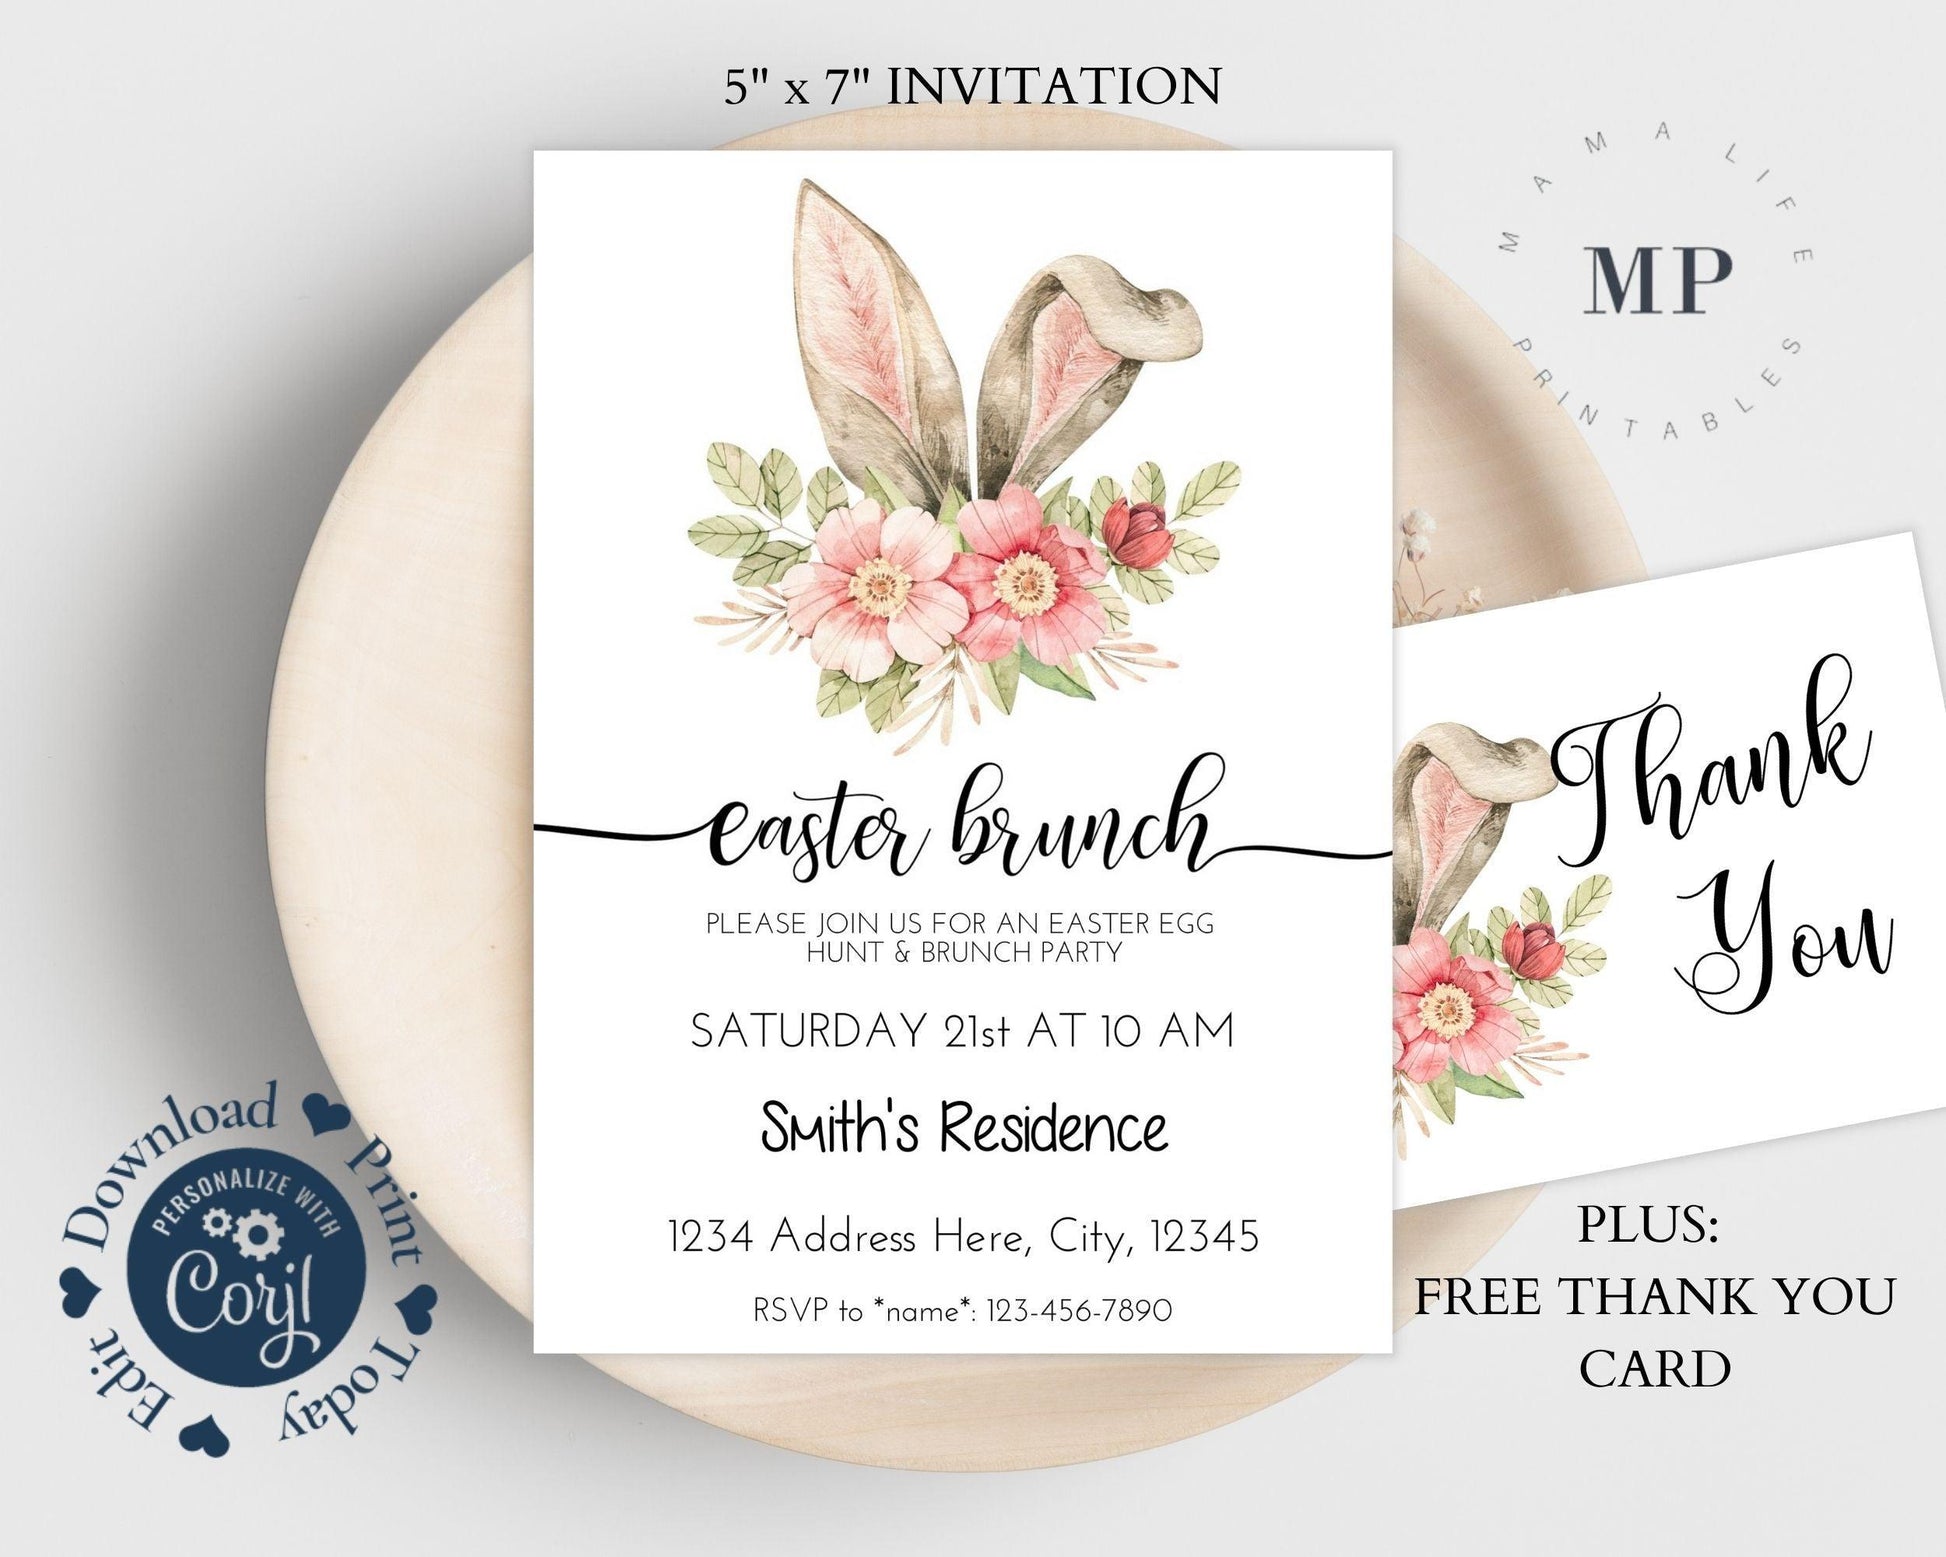 Easter Brunch Invitation plus FREE Thank You Card - Invitations - Mama Life Printables